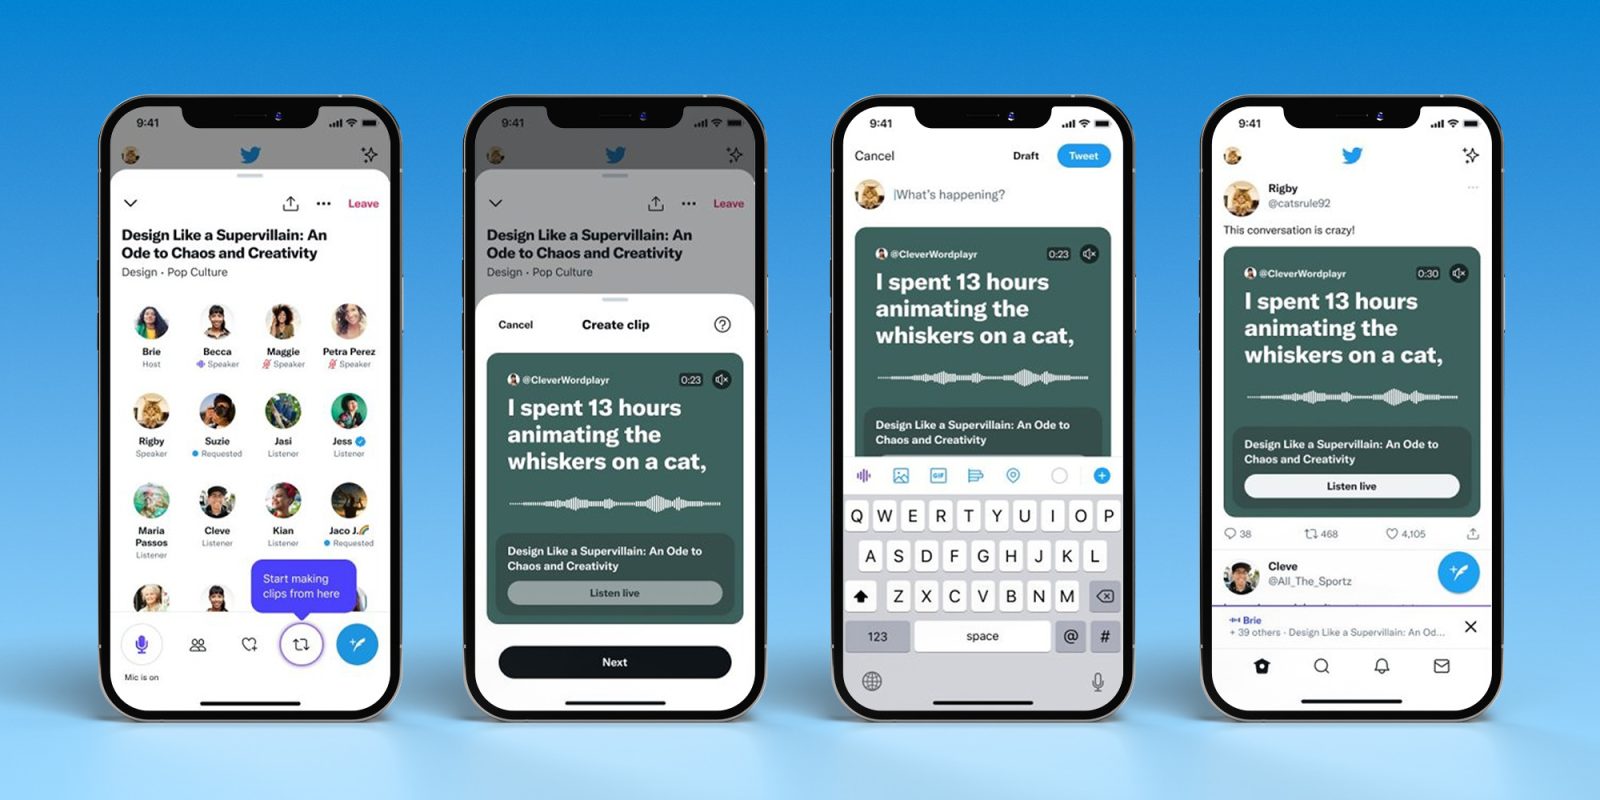 Twitter Extends Soundboard for Twitter Spaces to All iOS Users